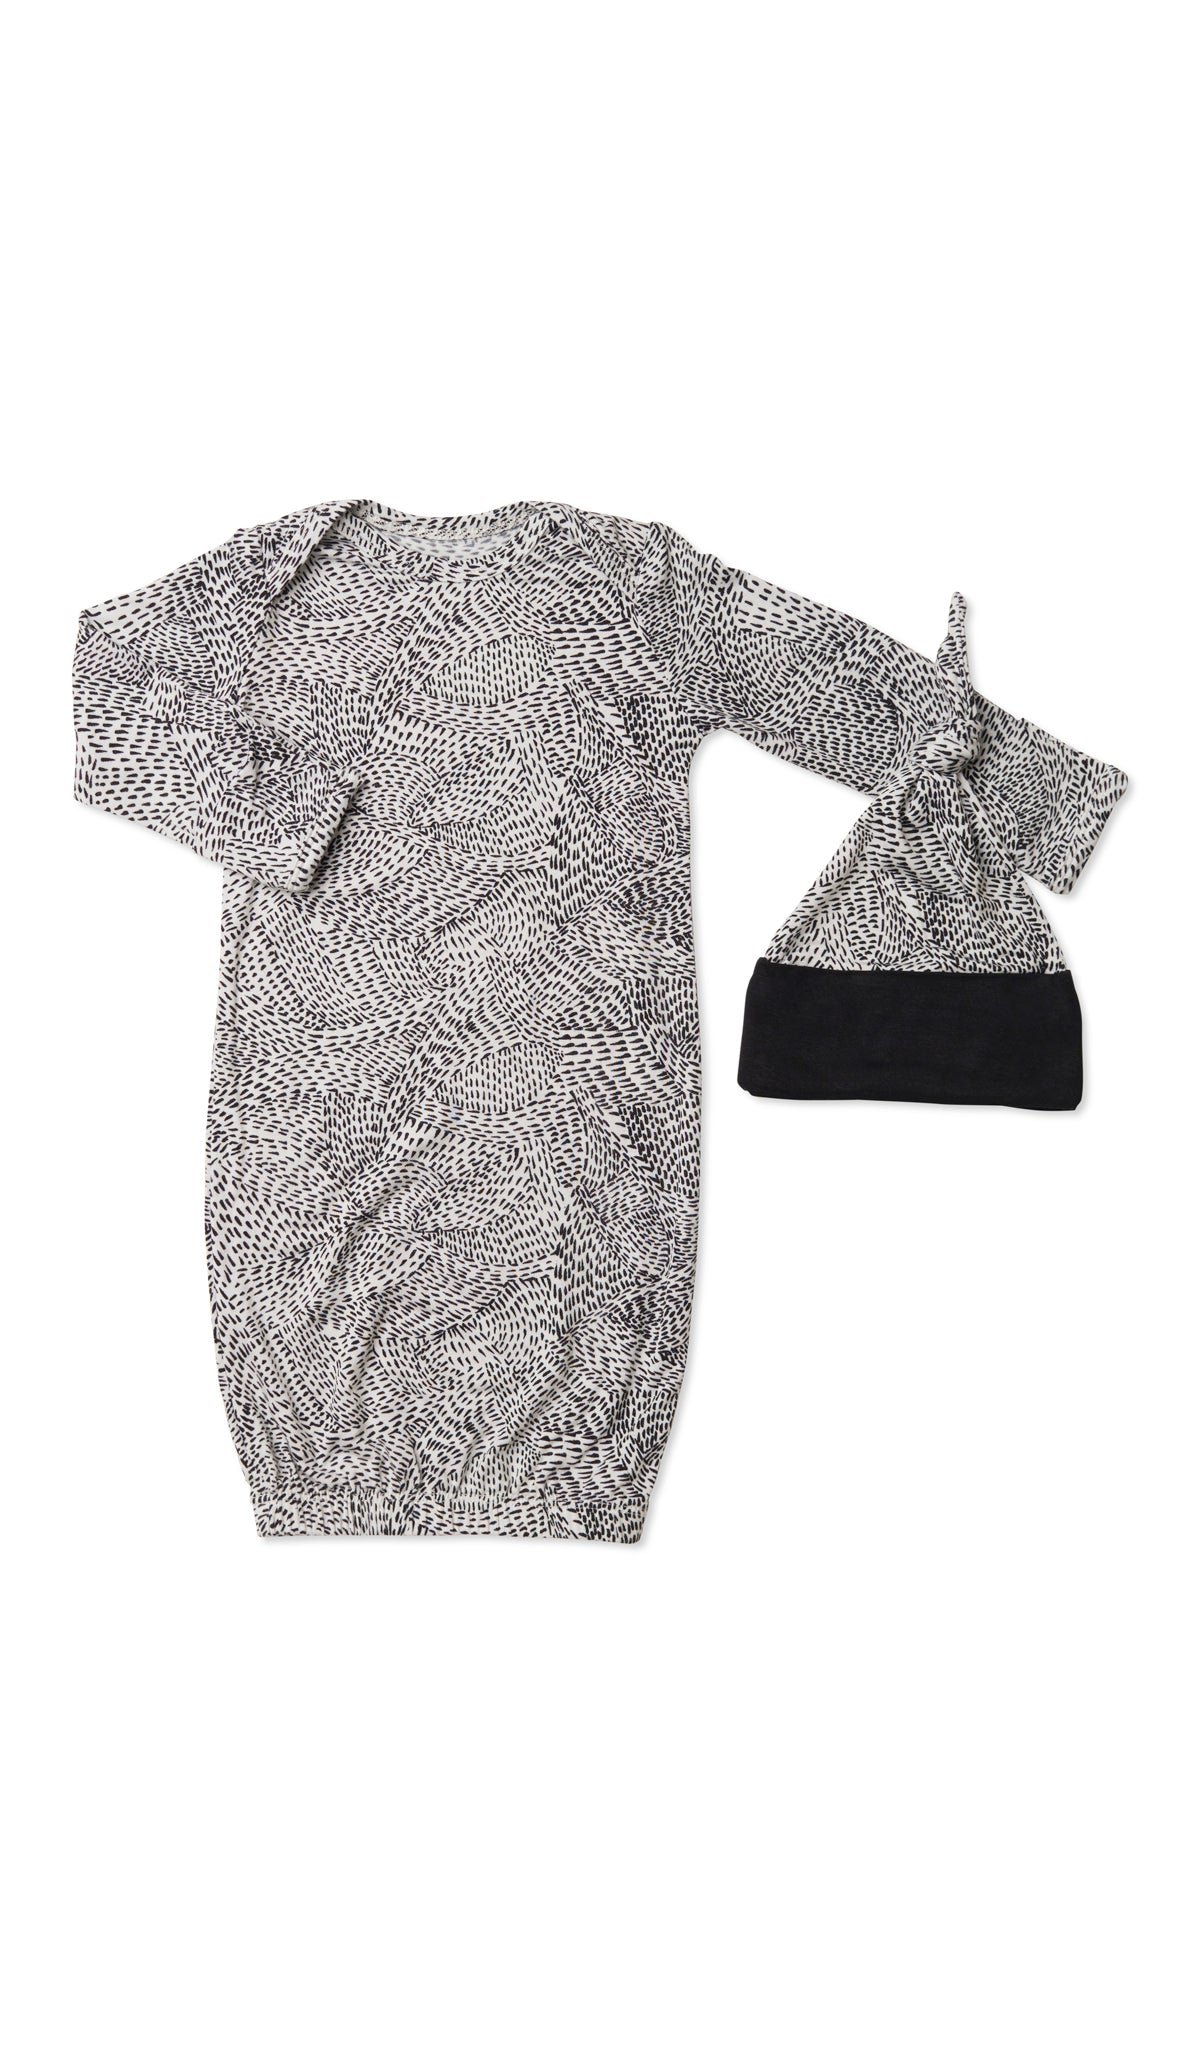 Twilight 2-Piece with long sleeve baby gown and matching knotted hat.